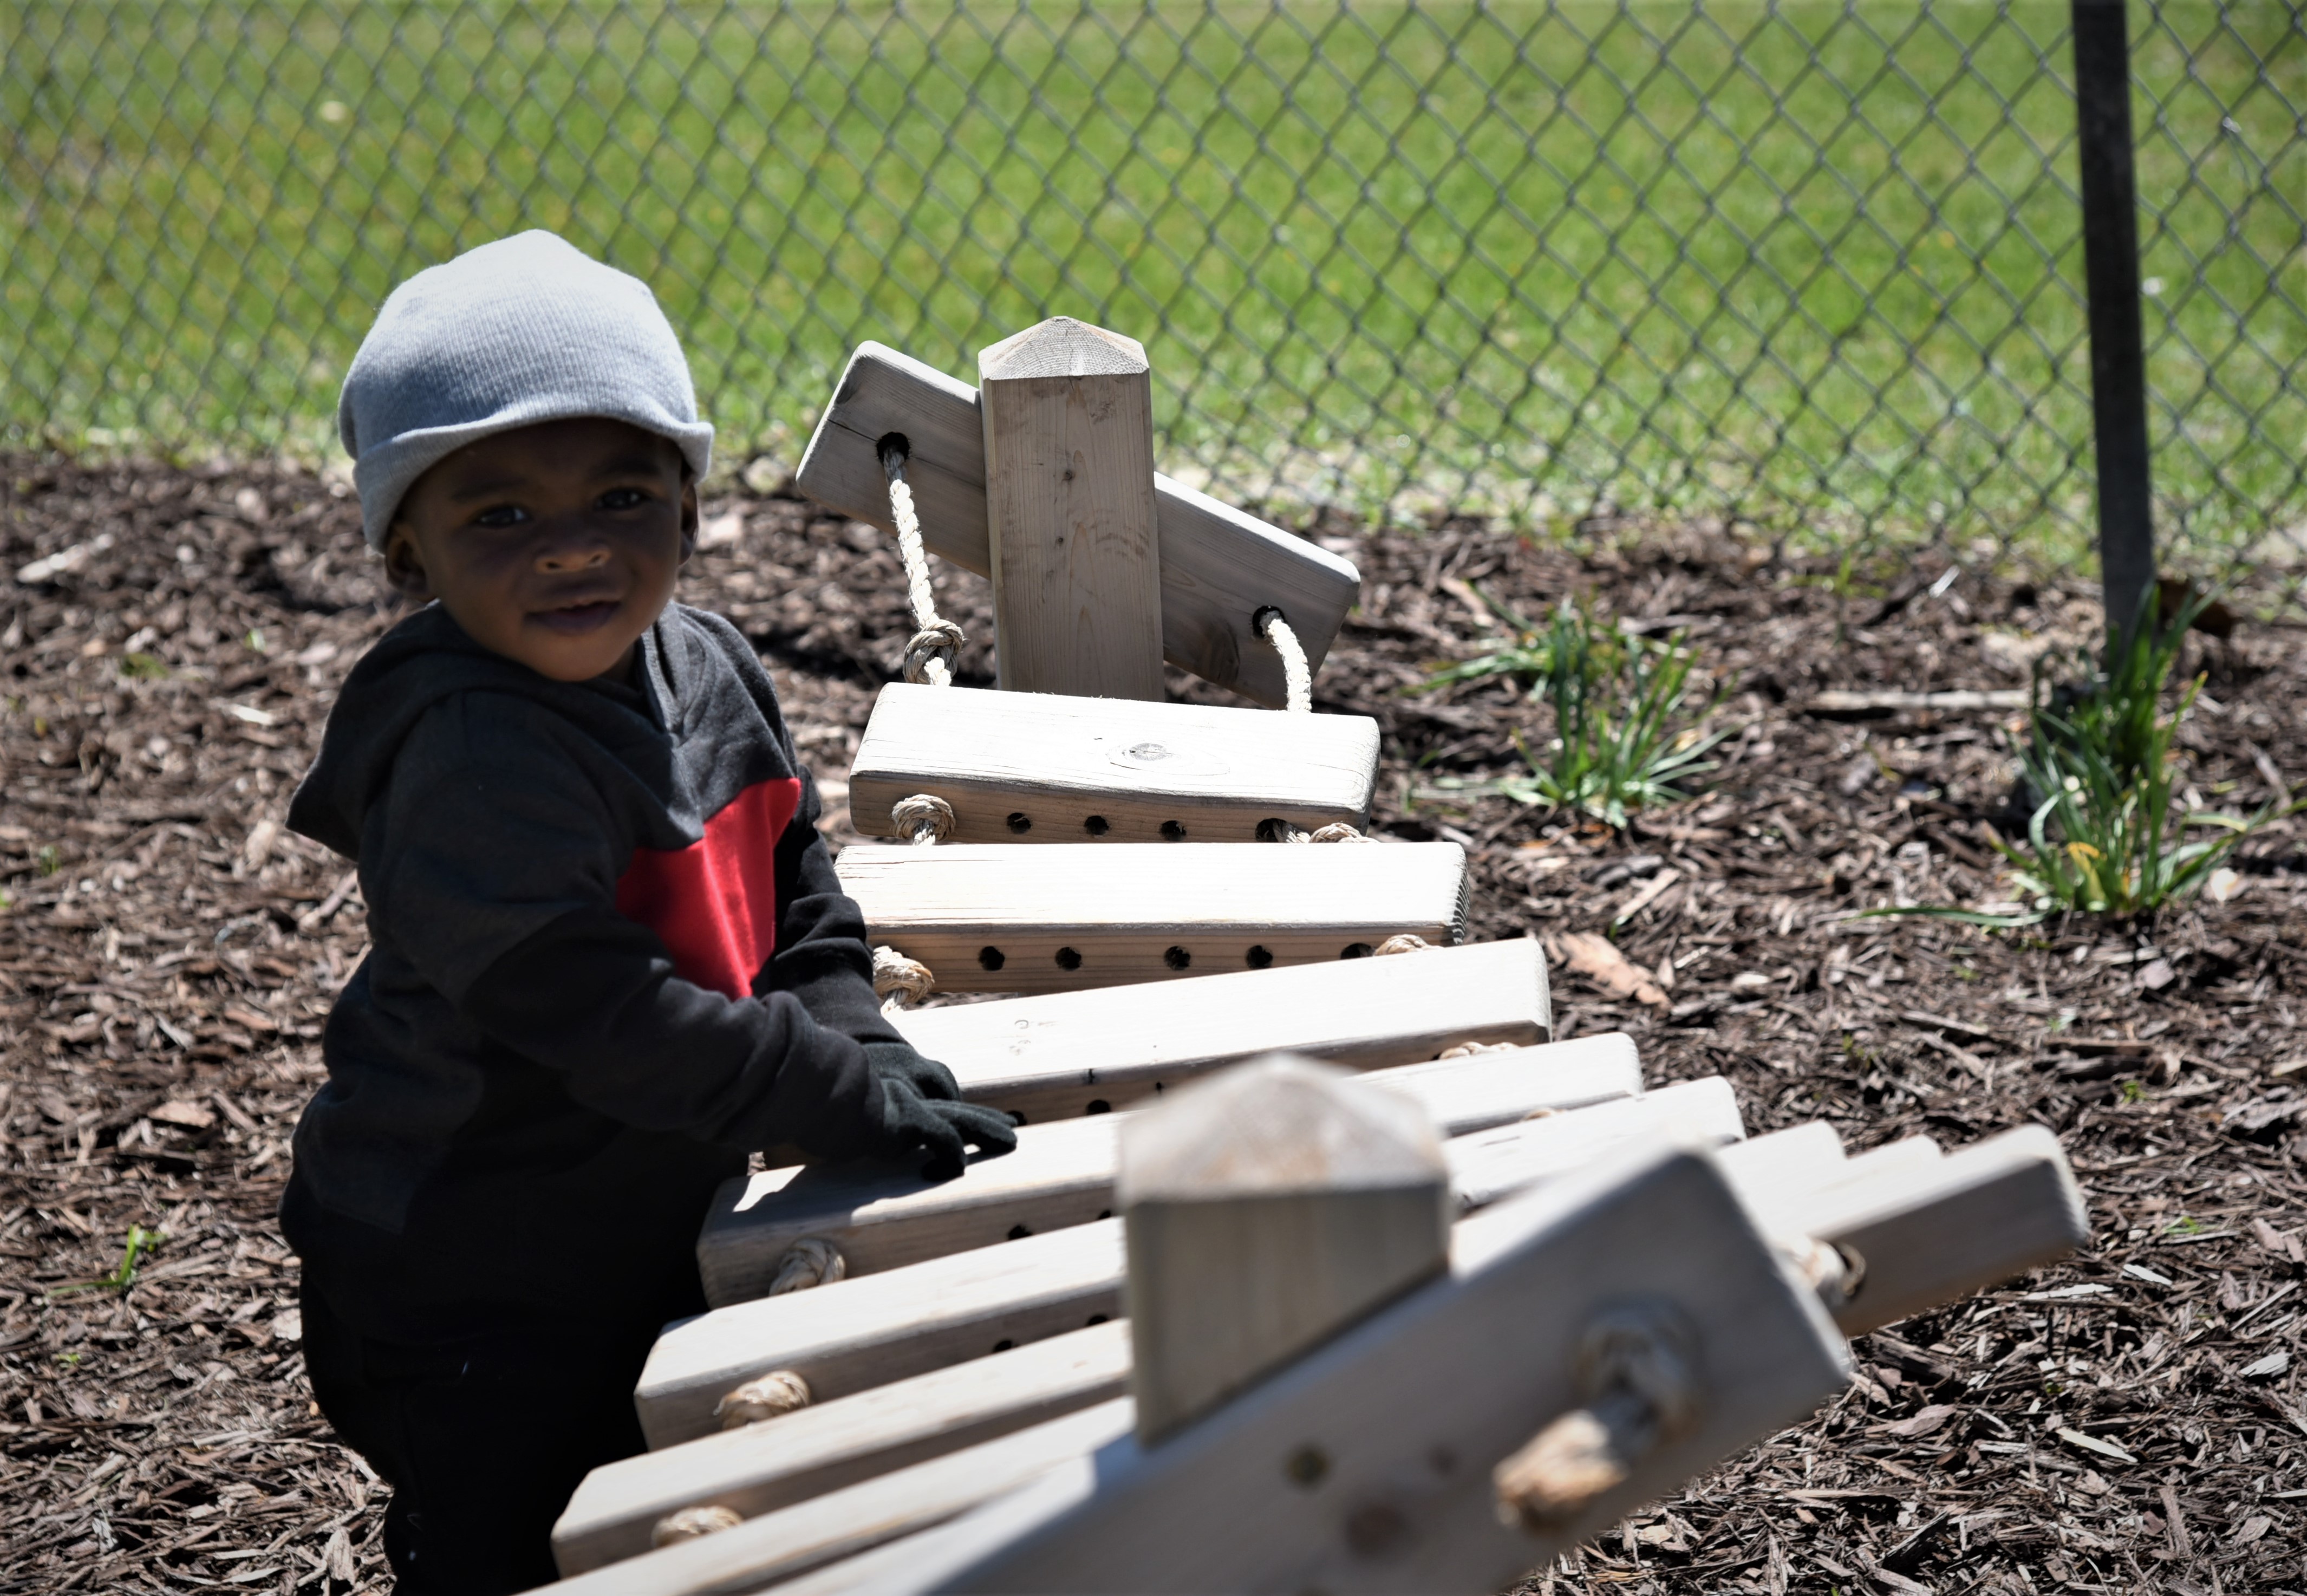 Gonzalez Court is latest site for an early learning garden in Pensacola